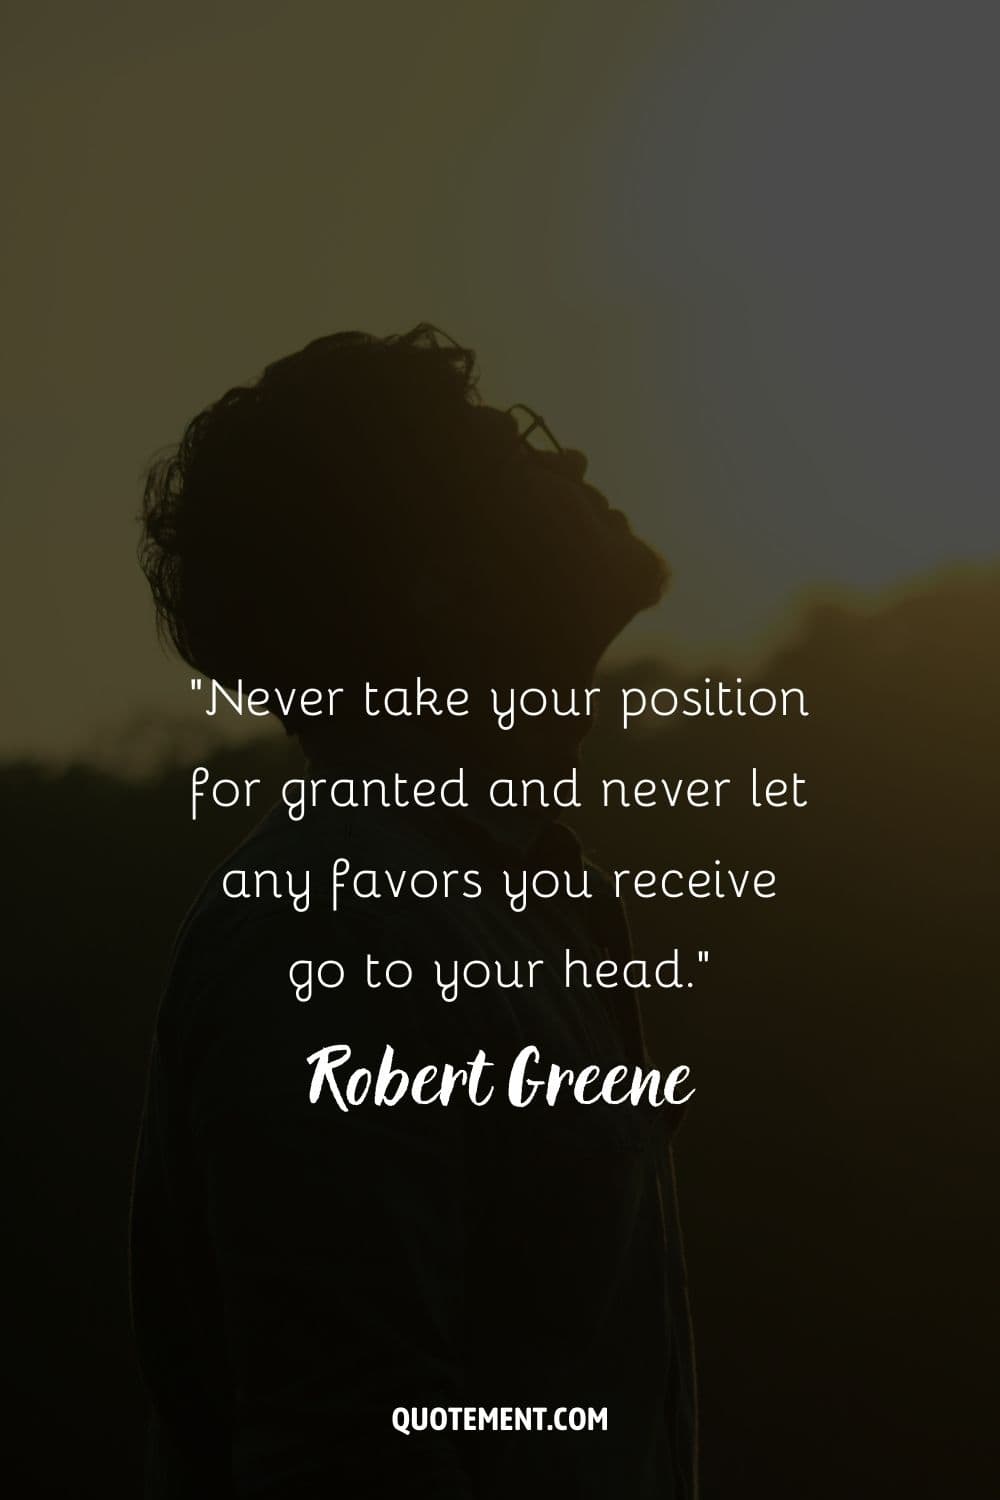 “Never take your position for granted and never let any favors you receive go to your head.” ― Robert Greene, The 48 Laws of Power